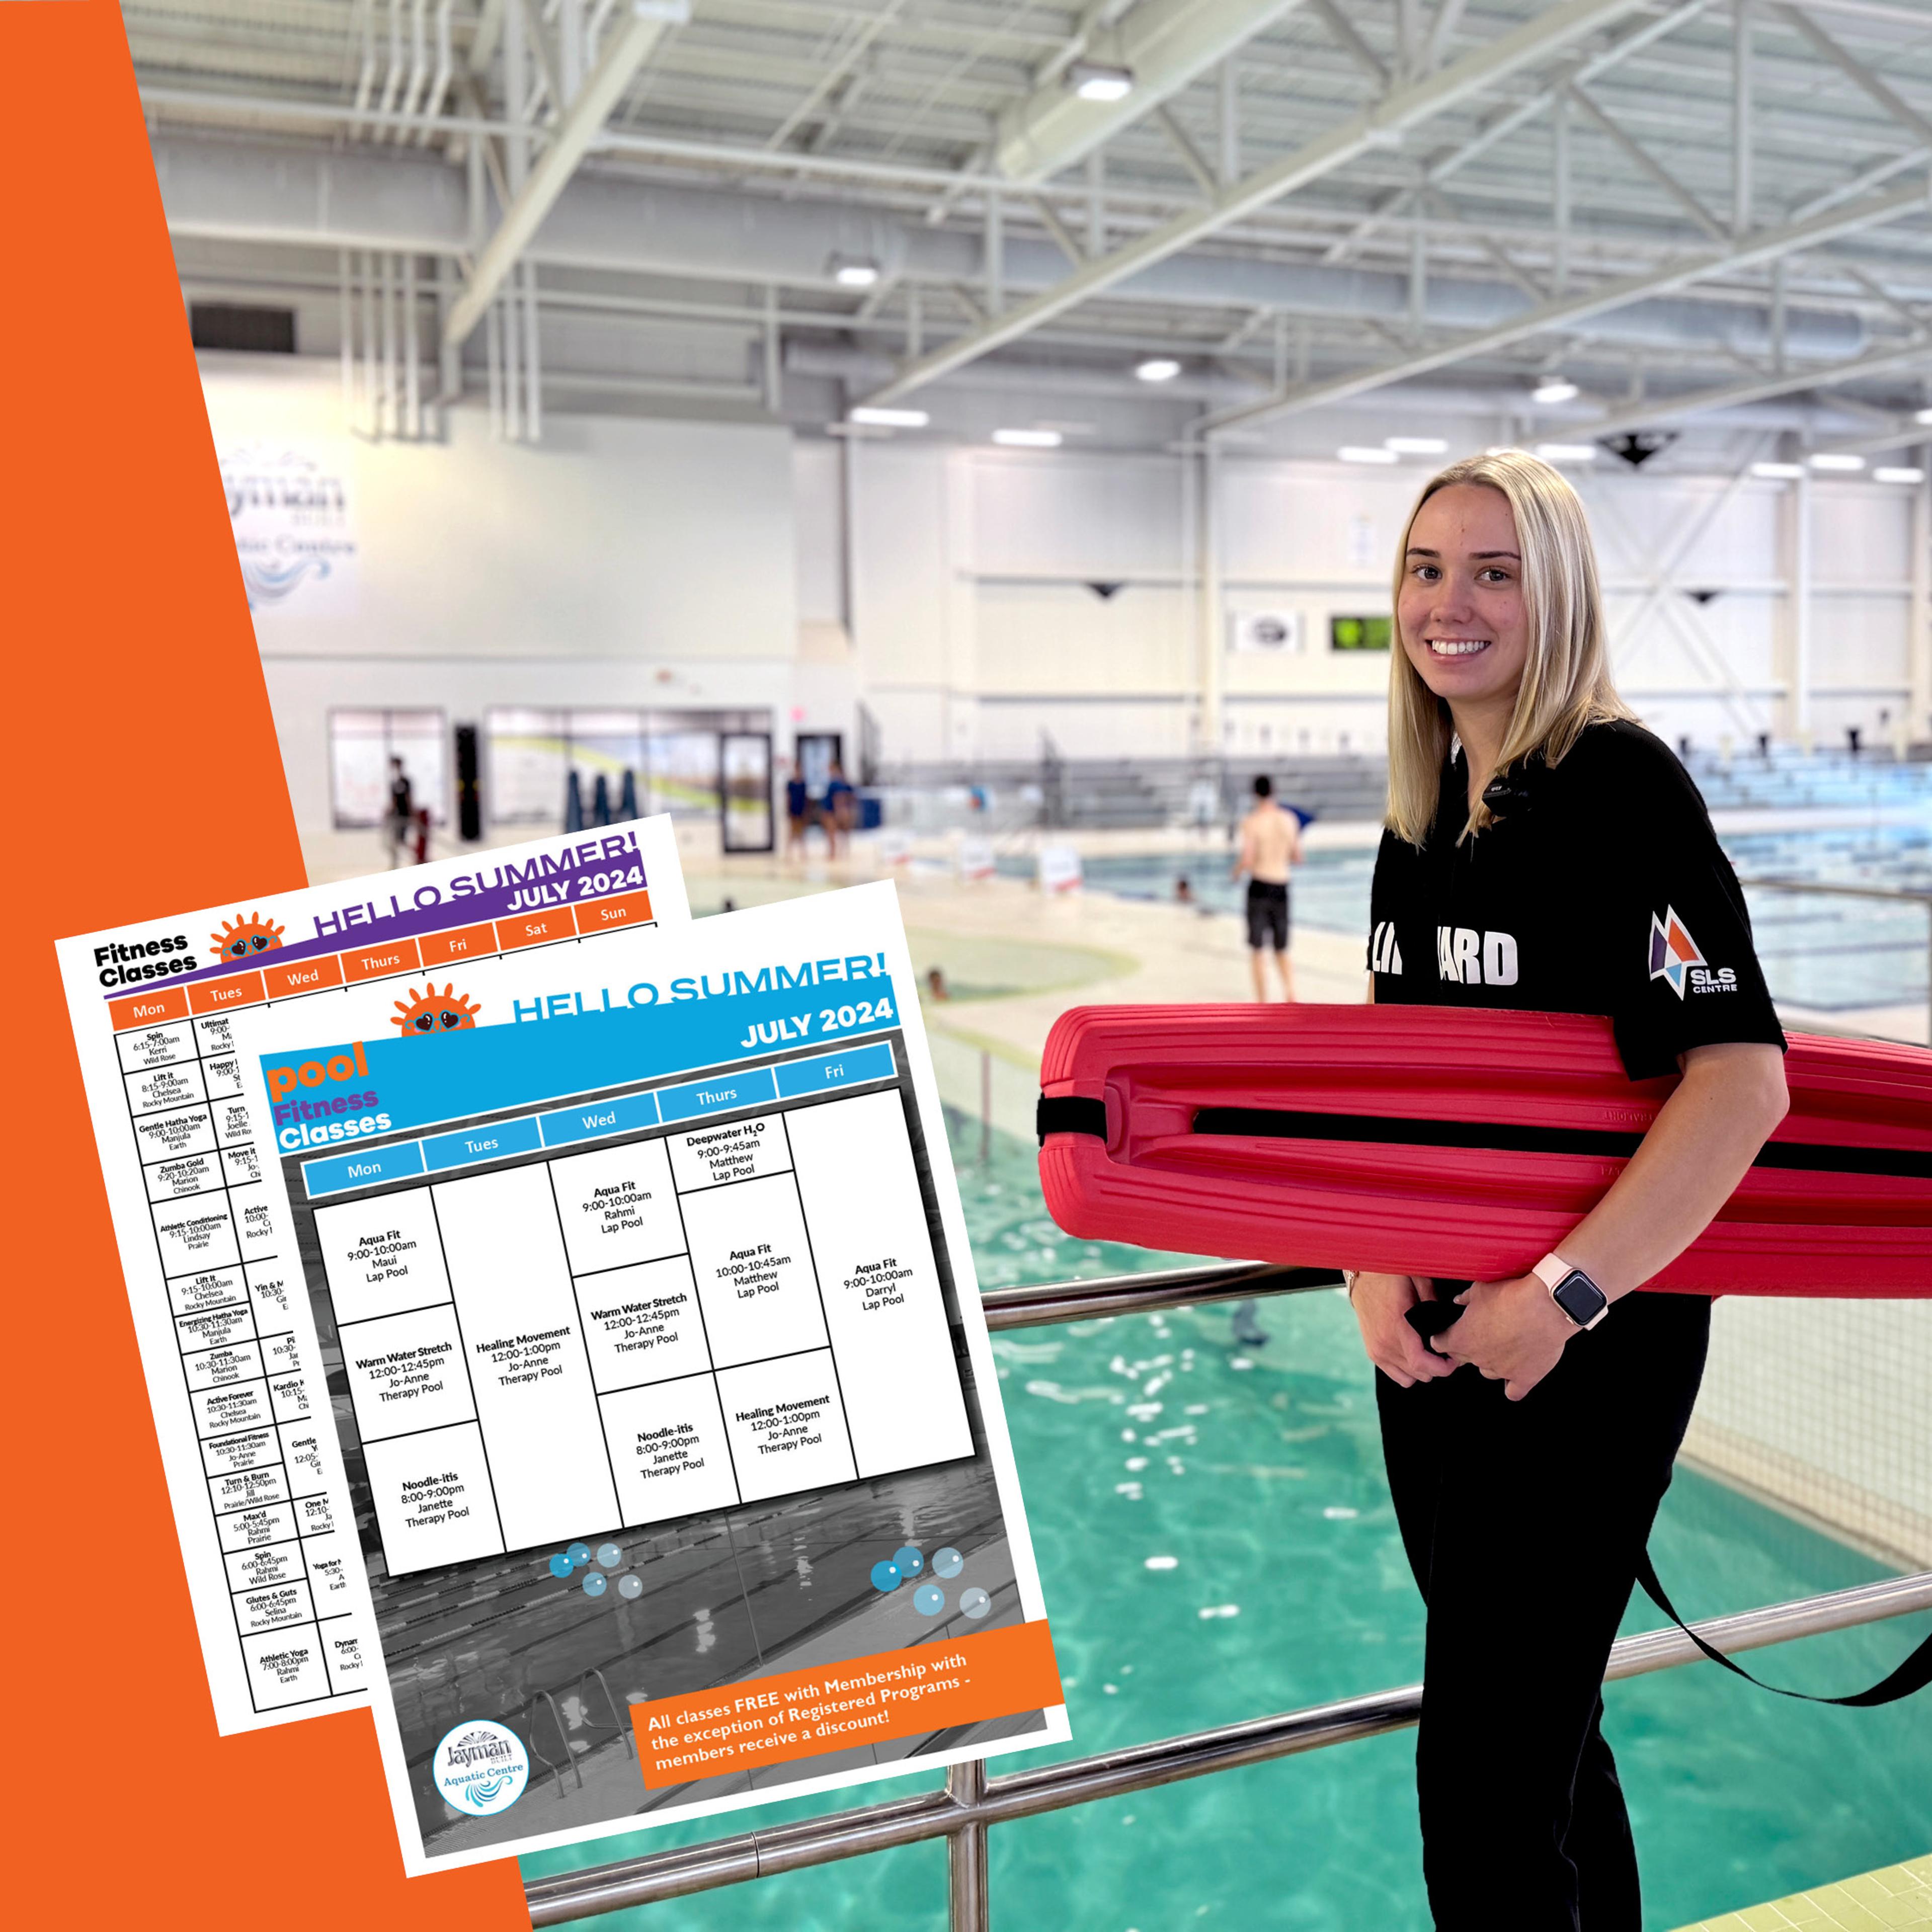 Smiling lifeguard holding a red floatation device next to a pool with a summer 2024 fitness and pool fitness class schedule